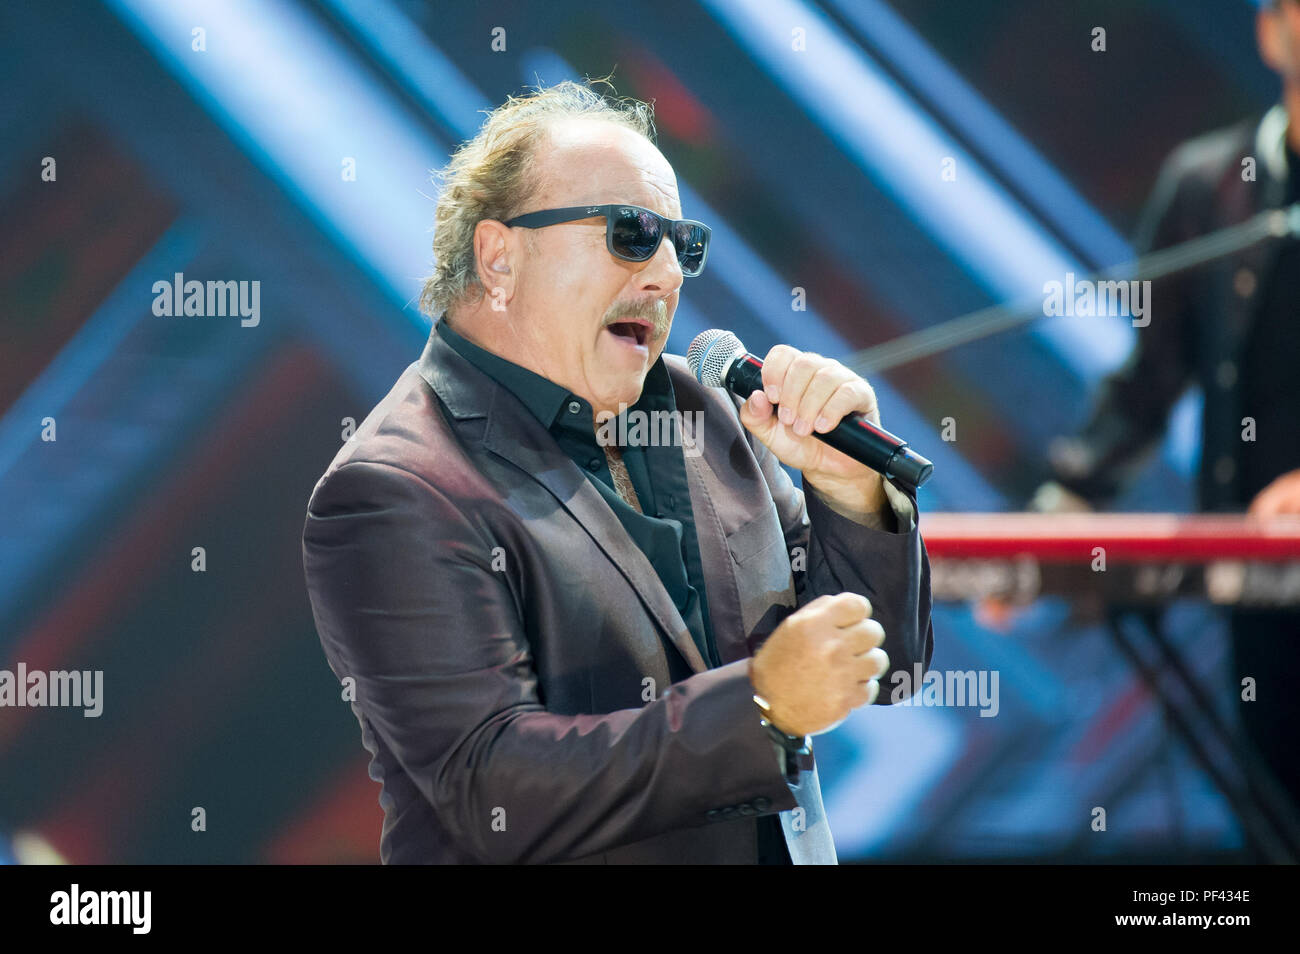 Herwig Rudisser of Opus in concert at Top Of The Top 2018 Sopot Festival in  Opera Lesna (Forest Opera) in Sopot, Poland. August 14th 2018 © Wojciech S  Stock Photo - Alamy